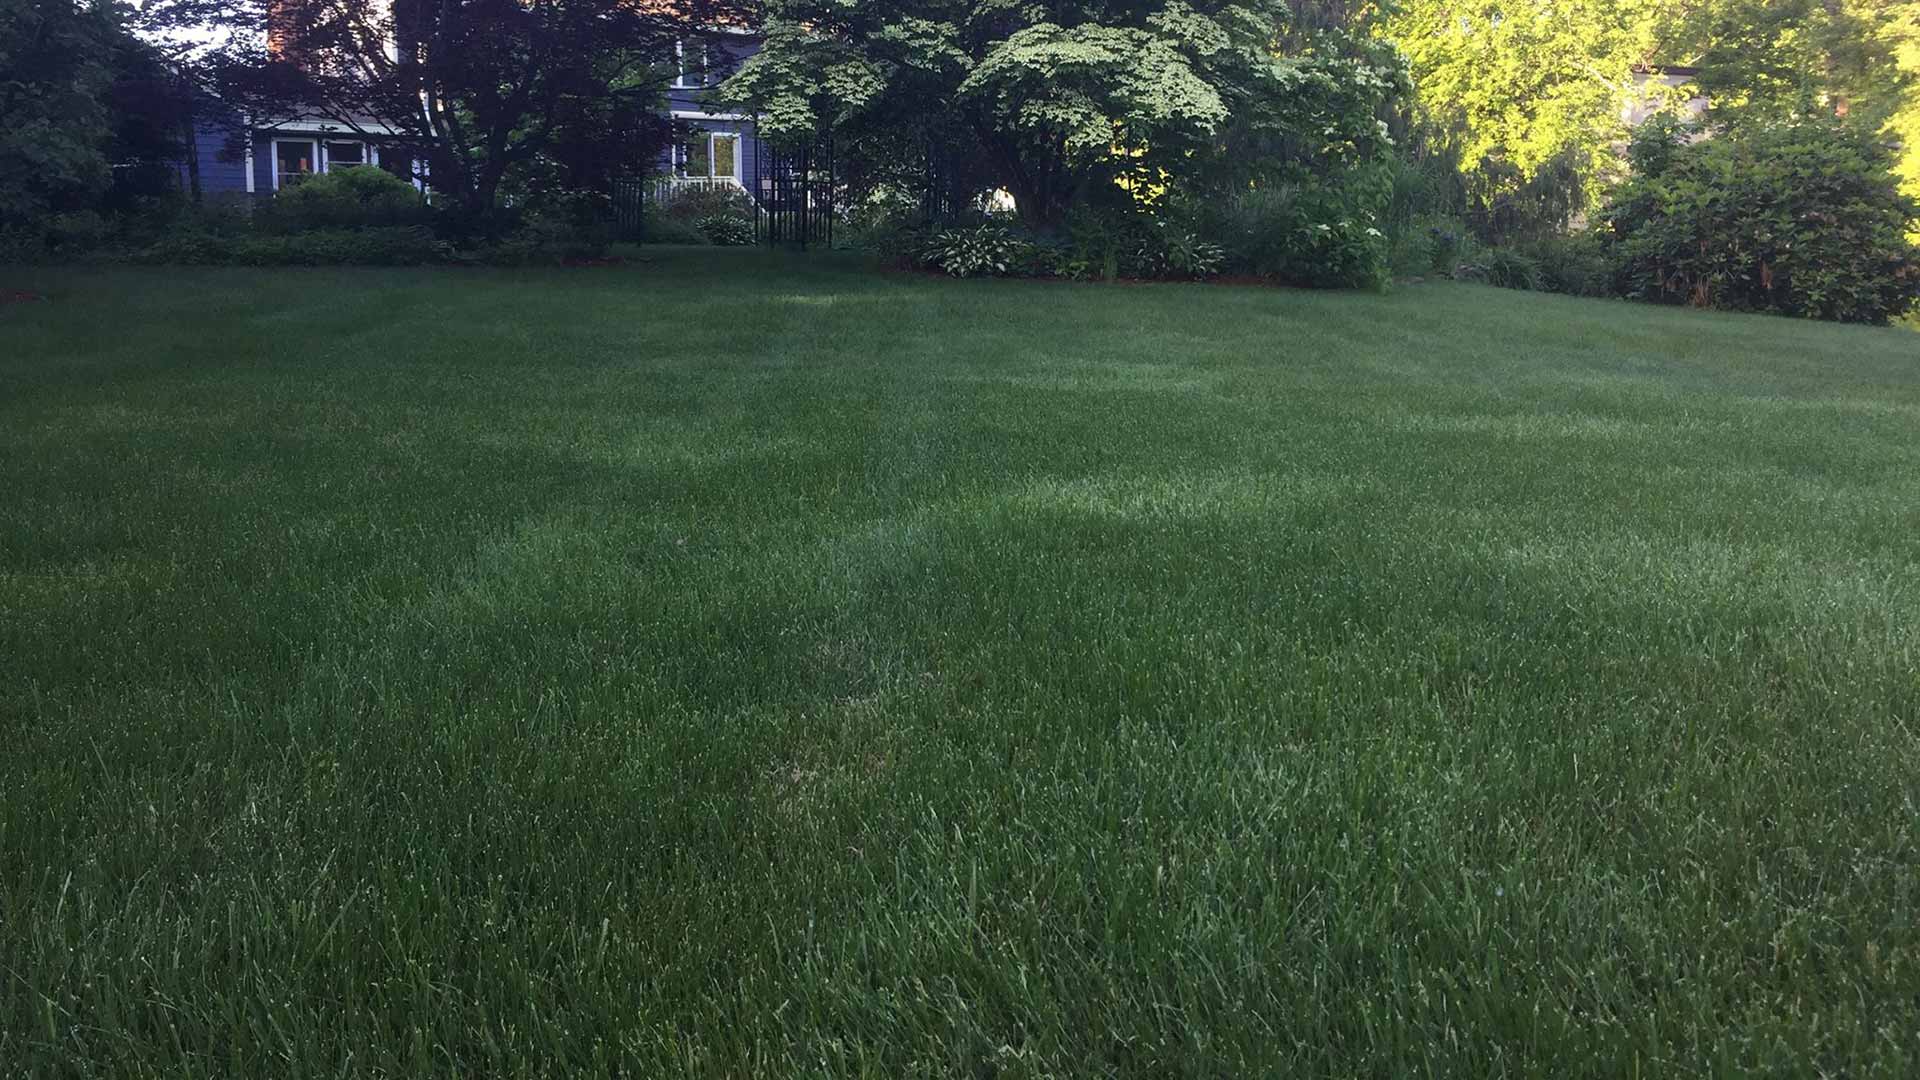 Home near Lancaster, MA with recent mowing and lawn care.